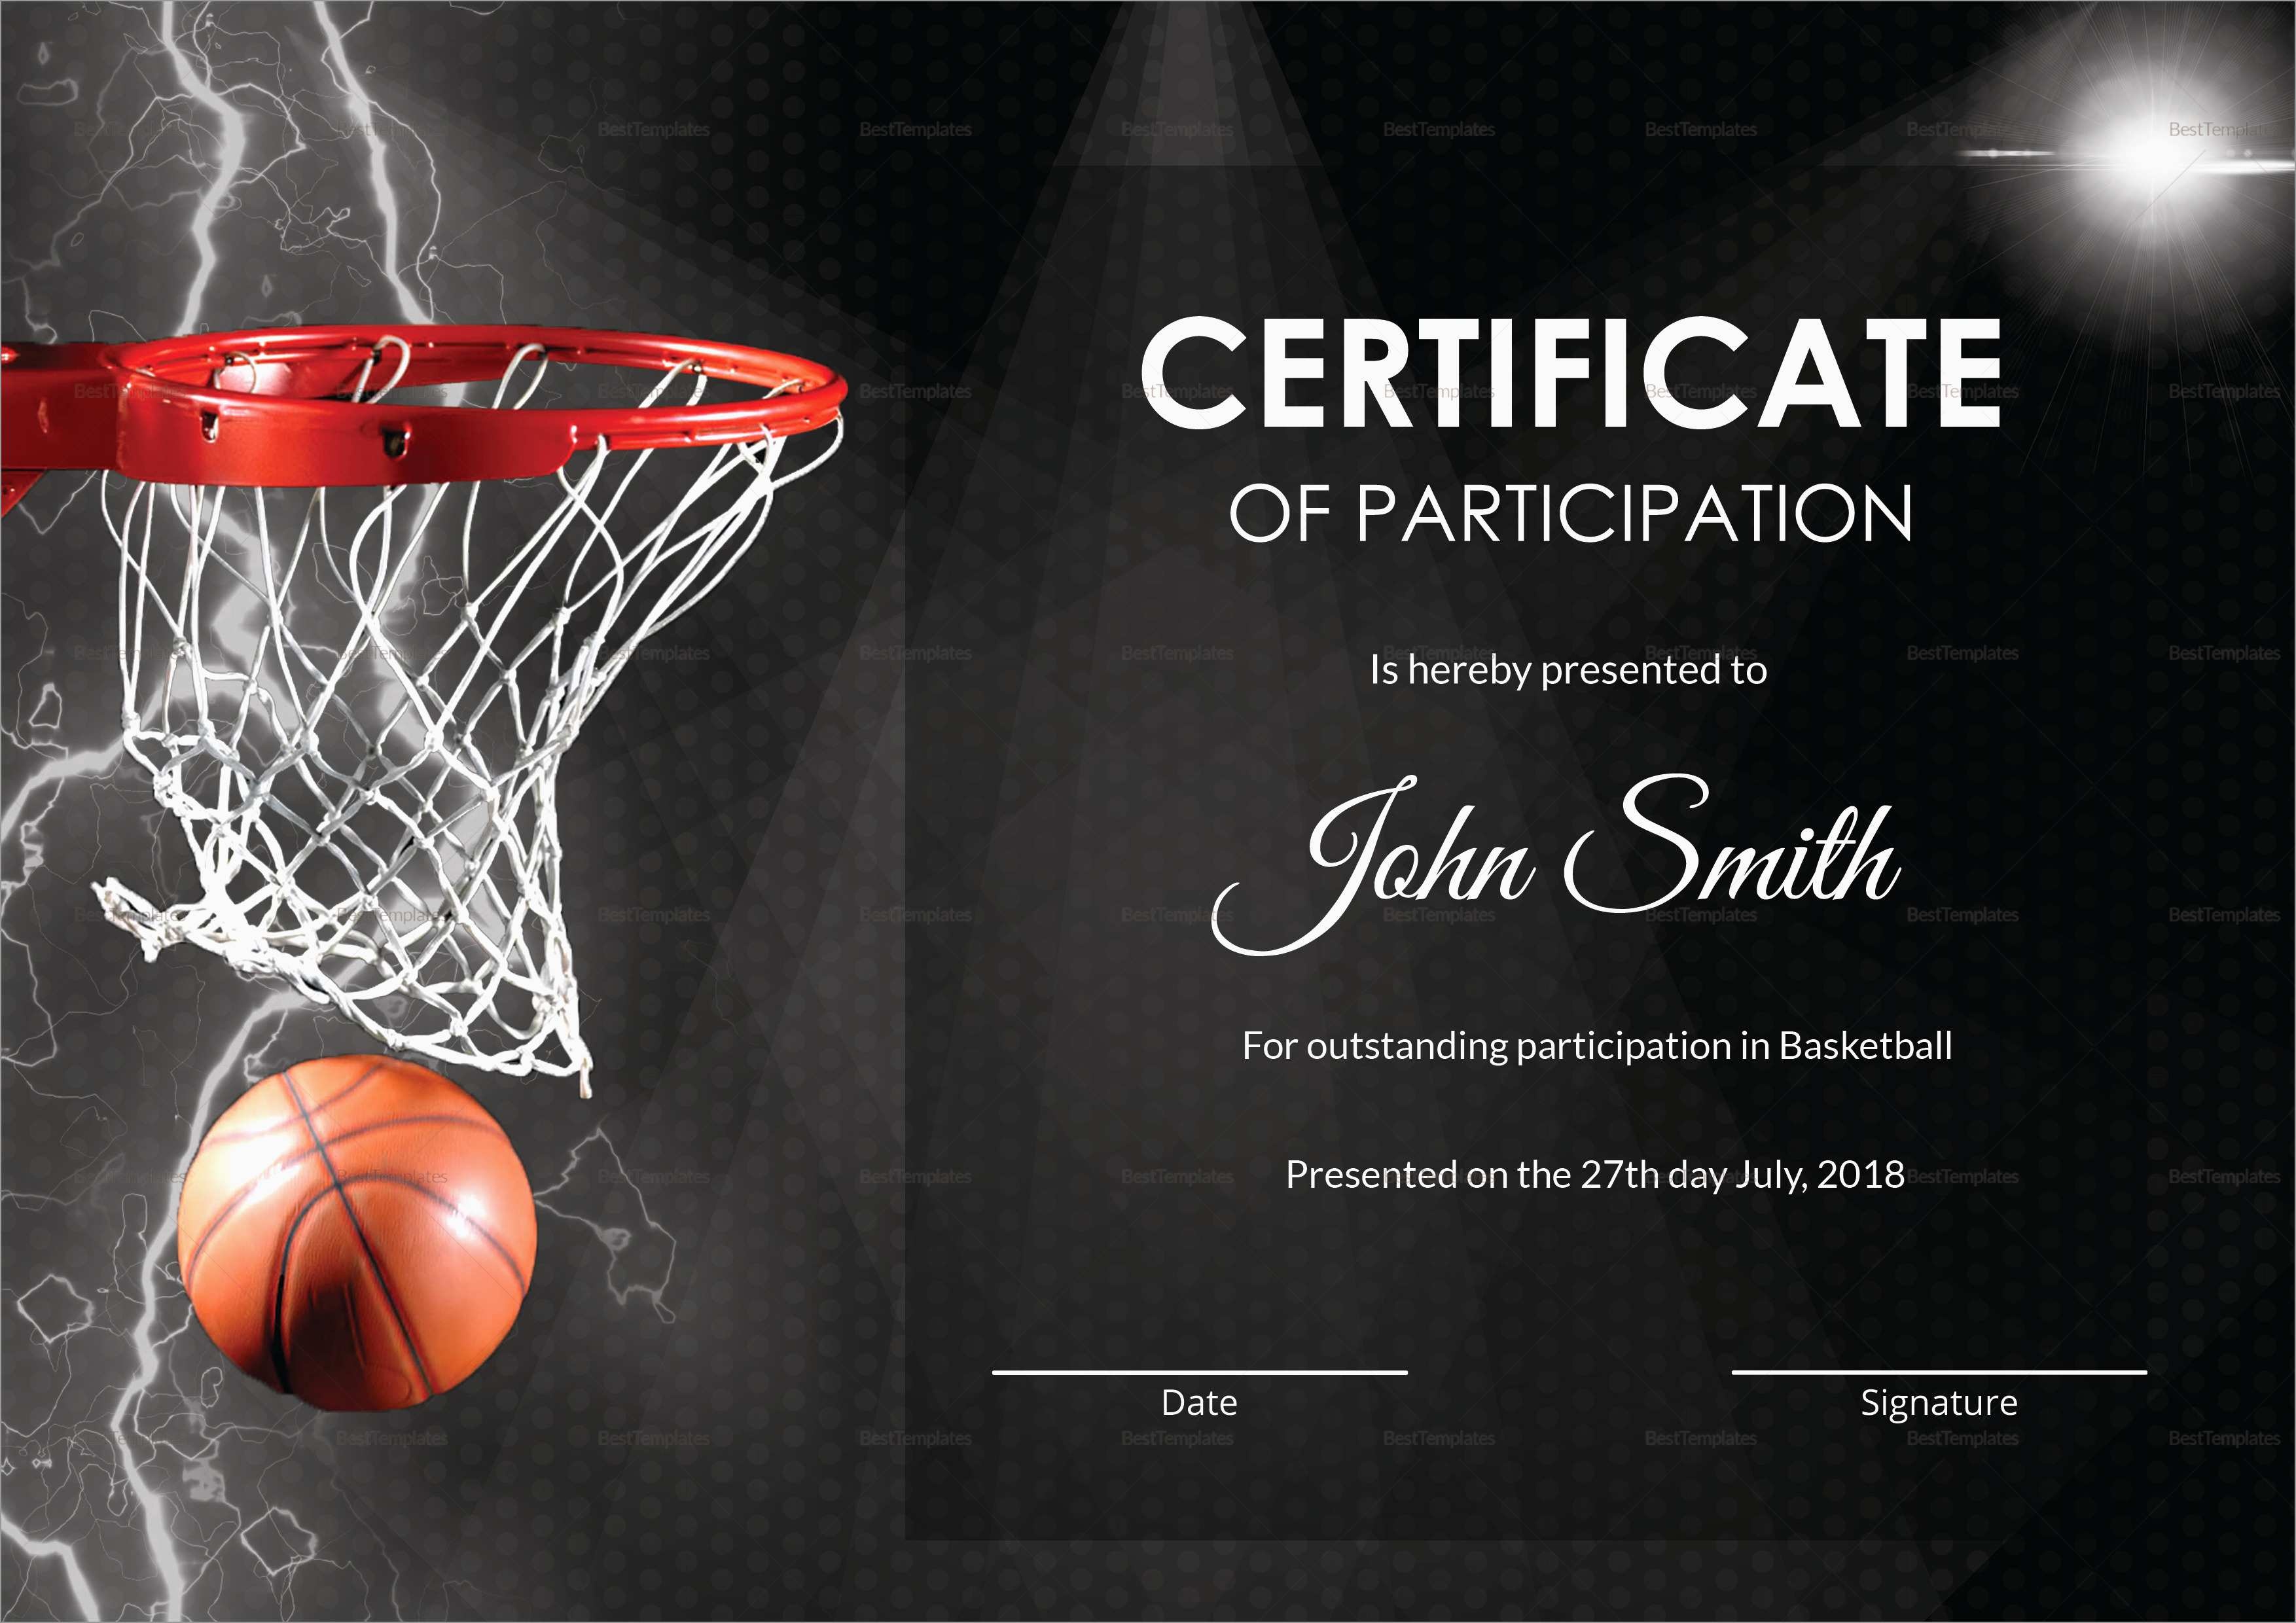 Elegant Free Basketball Website Templates | Best Of Template - Basketball Participation Certificate Free Printable